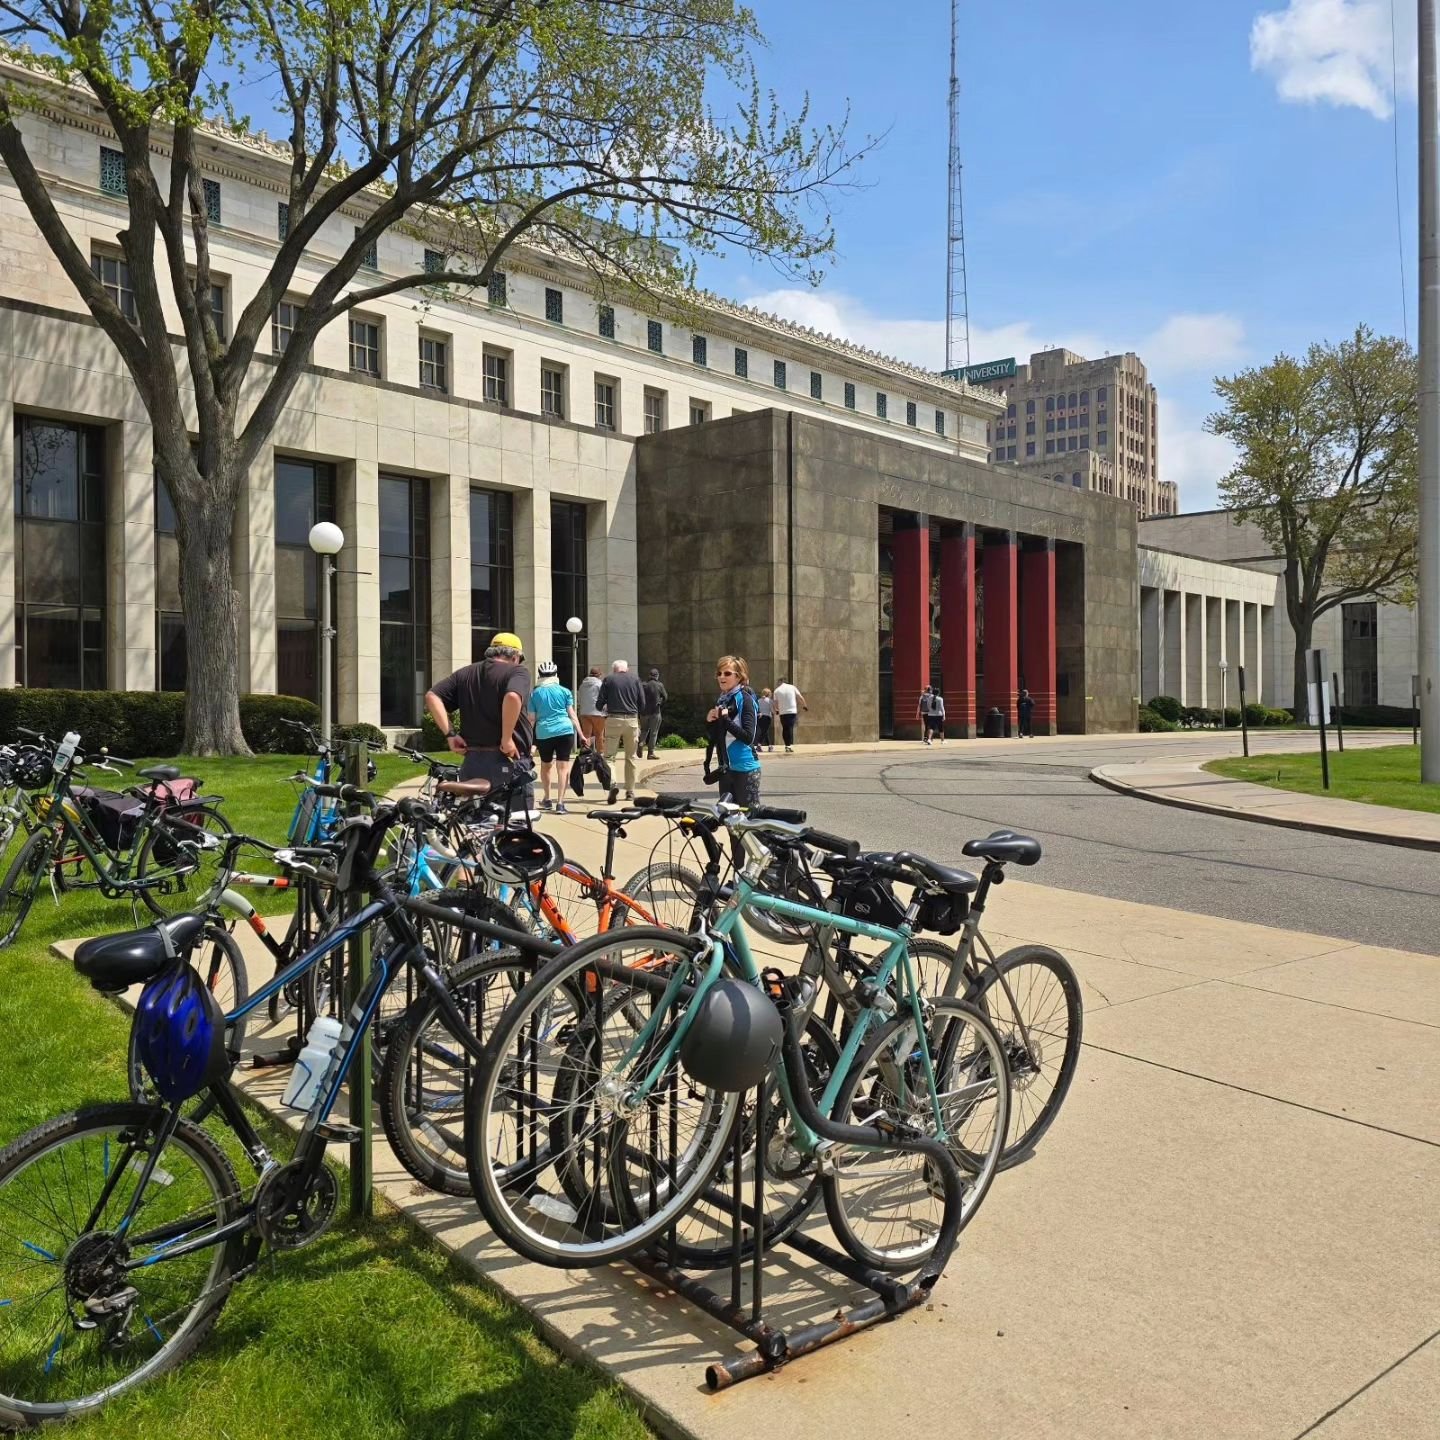 Happy Independent Bookstore Day! On top of the 5 great shops we visited, our #booksandbikestour got a special tour of the Main Branch of the @detroitpubliclibrary! @johnkingbooksdetroit @27thletterbooks @sourcebooksellers @detroitspecialsbooks @vault